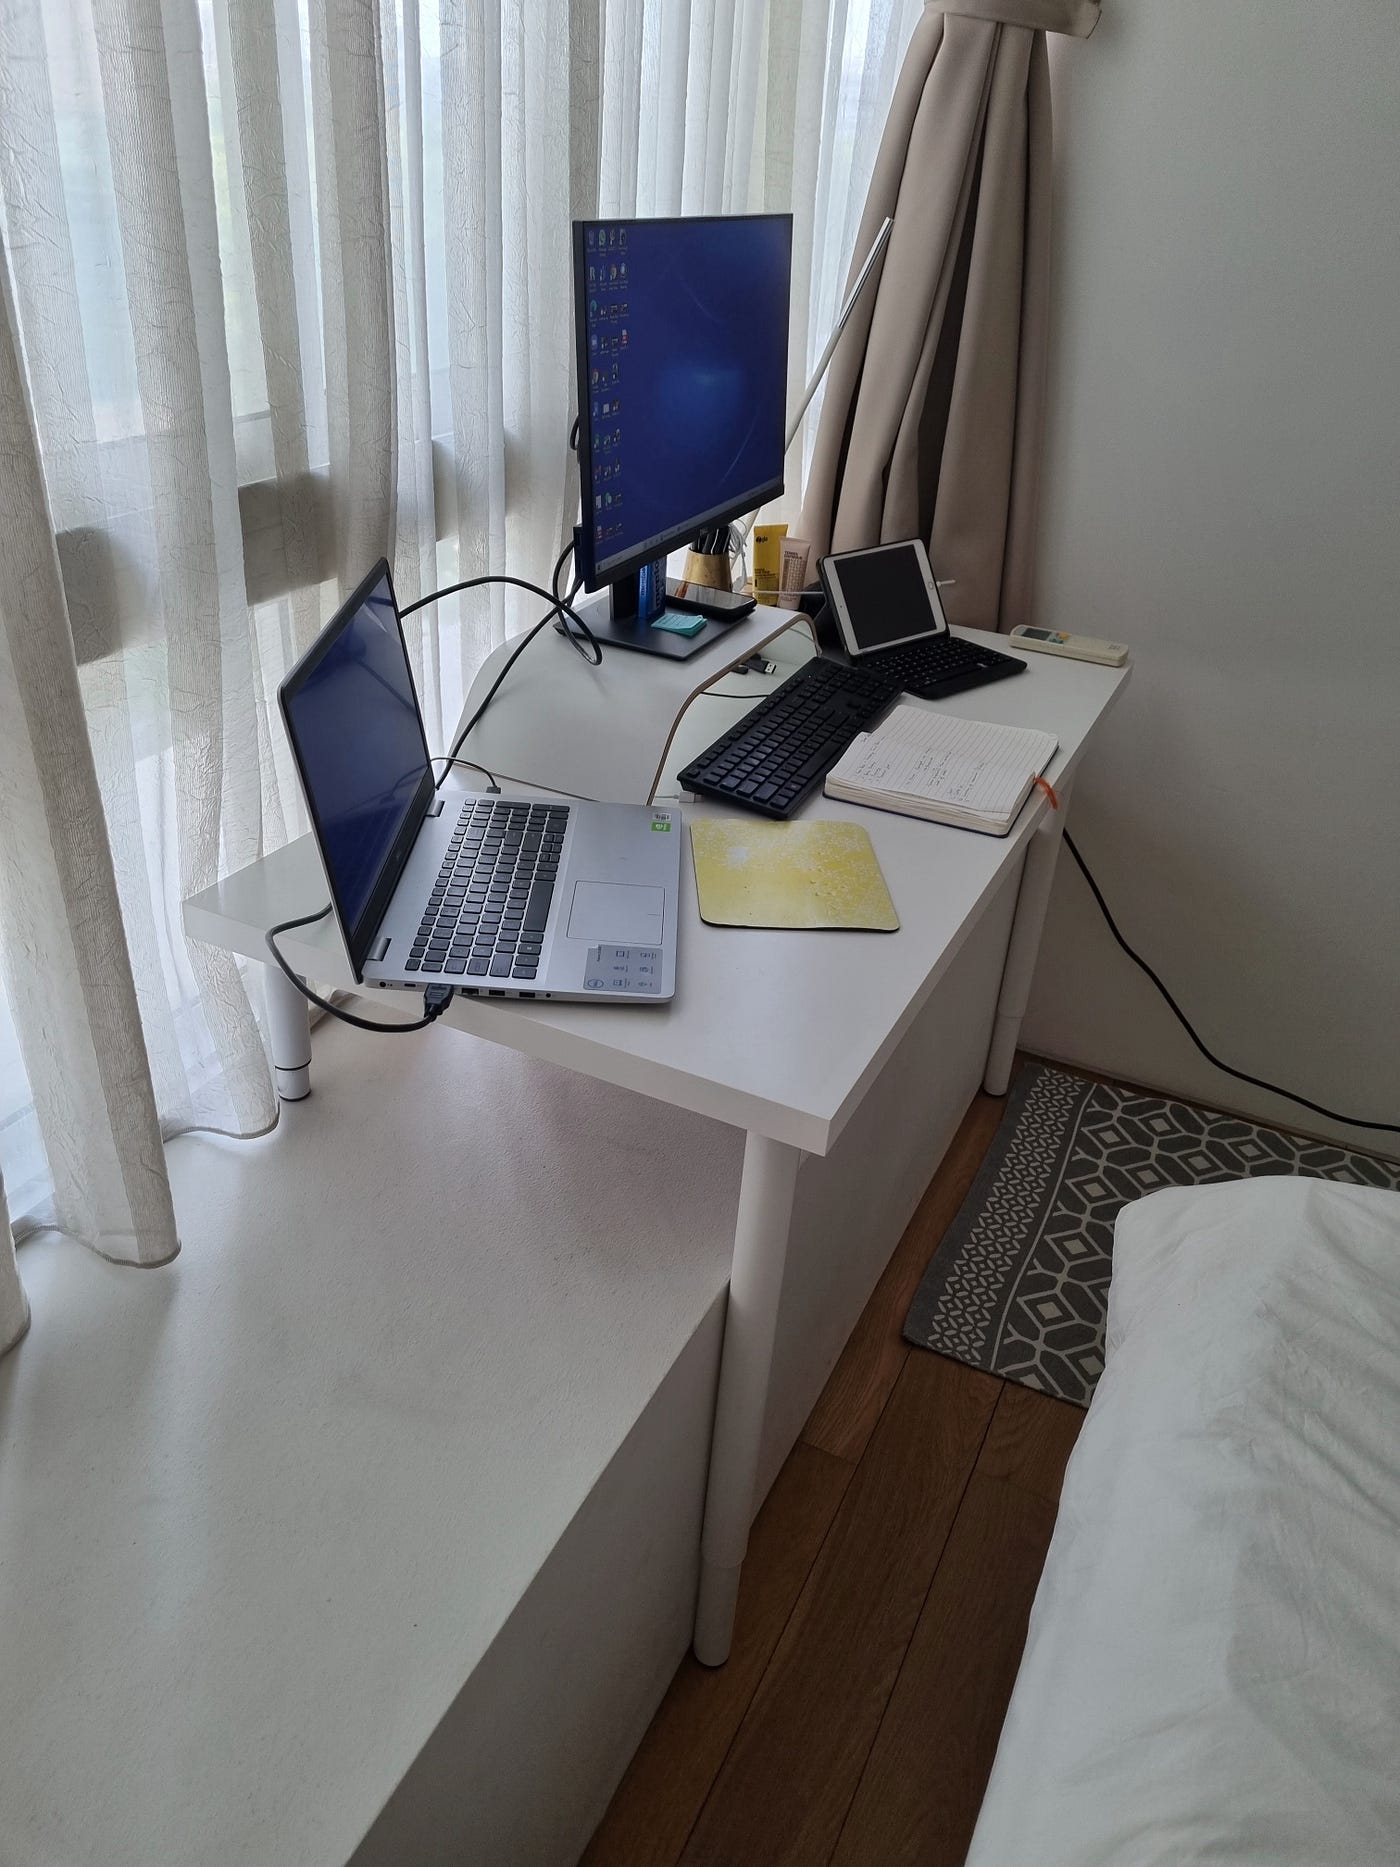 How to make a cheap DIY — Bay Window / Ledge Desk in Singapore for  only~S$80-130 | by KW | Medium